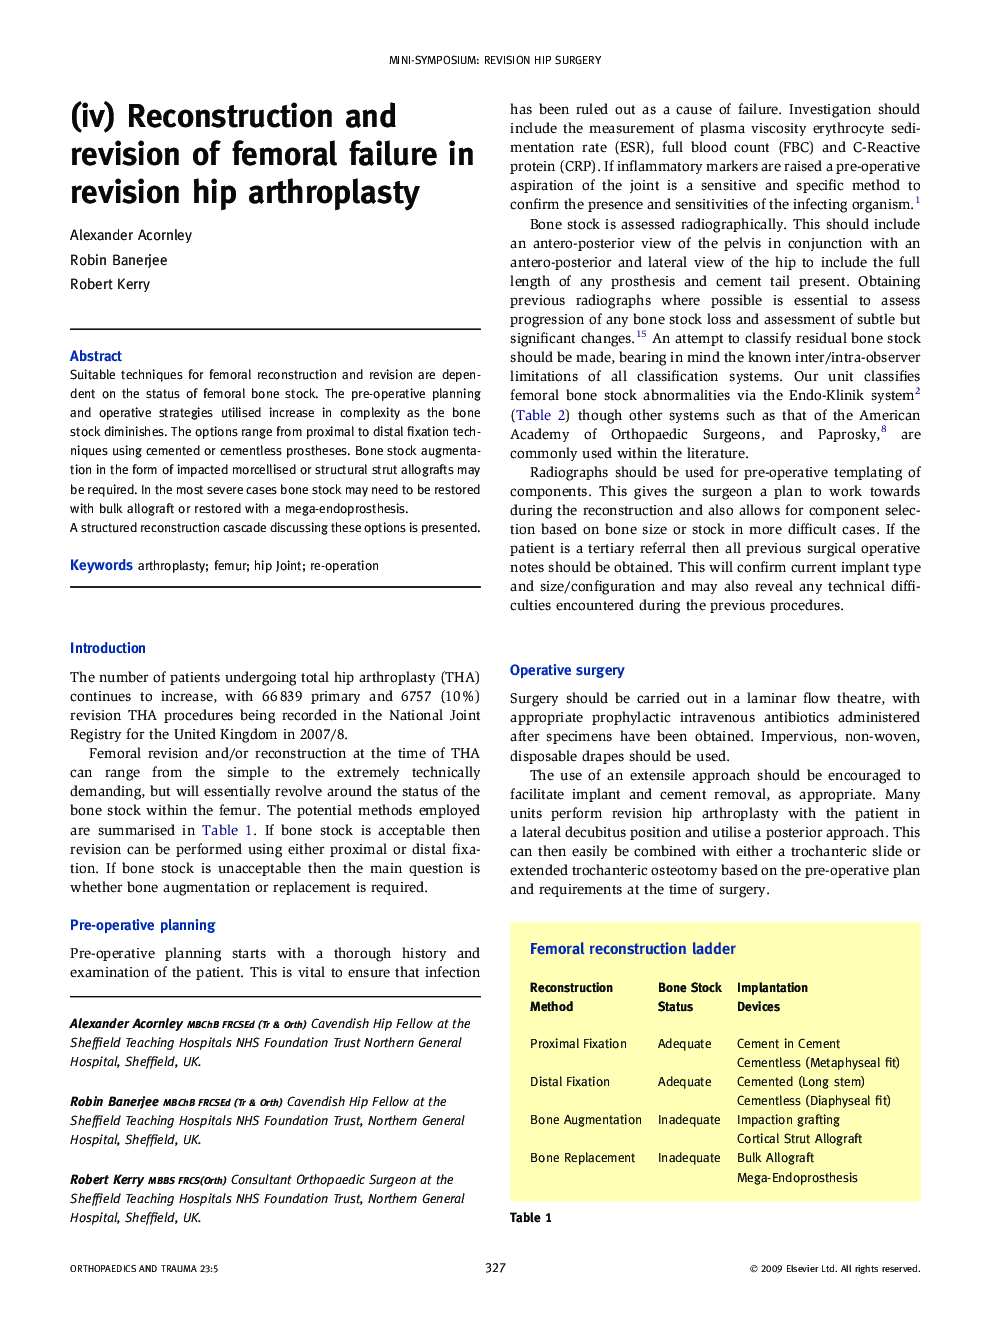 (iv) Reconstruction and revision of femoral failure in revision hip arthroplasty